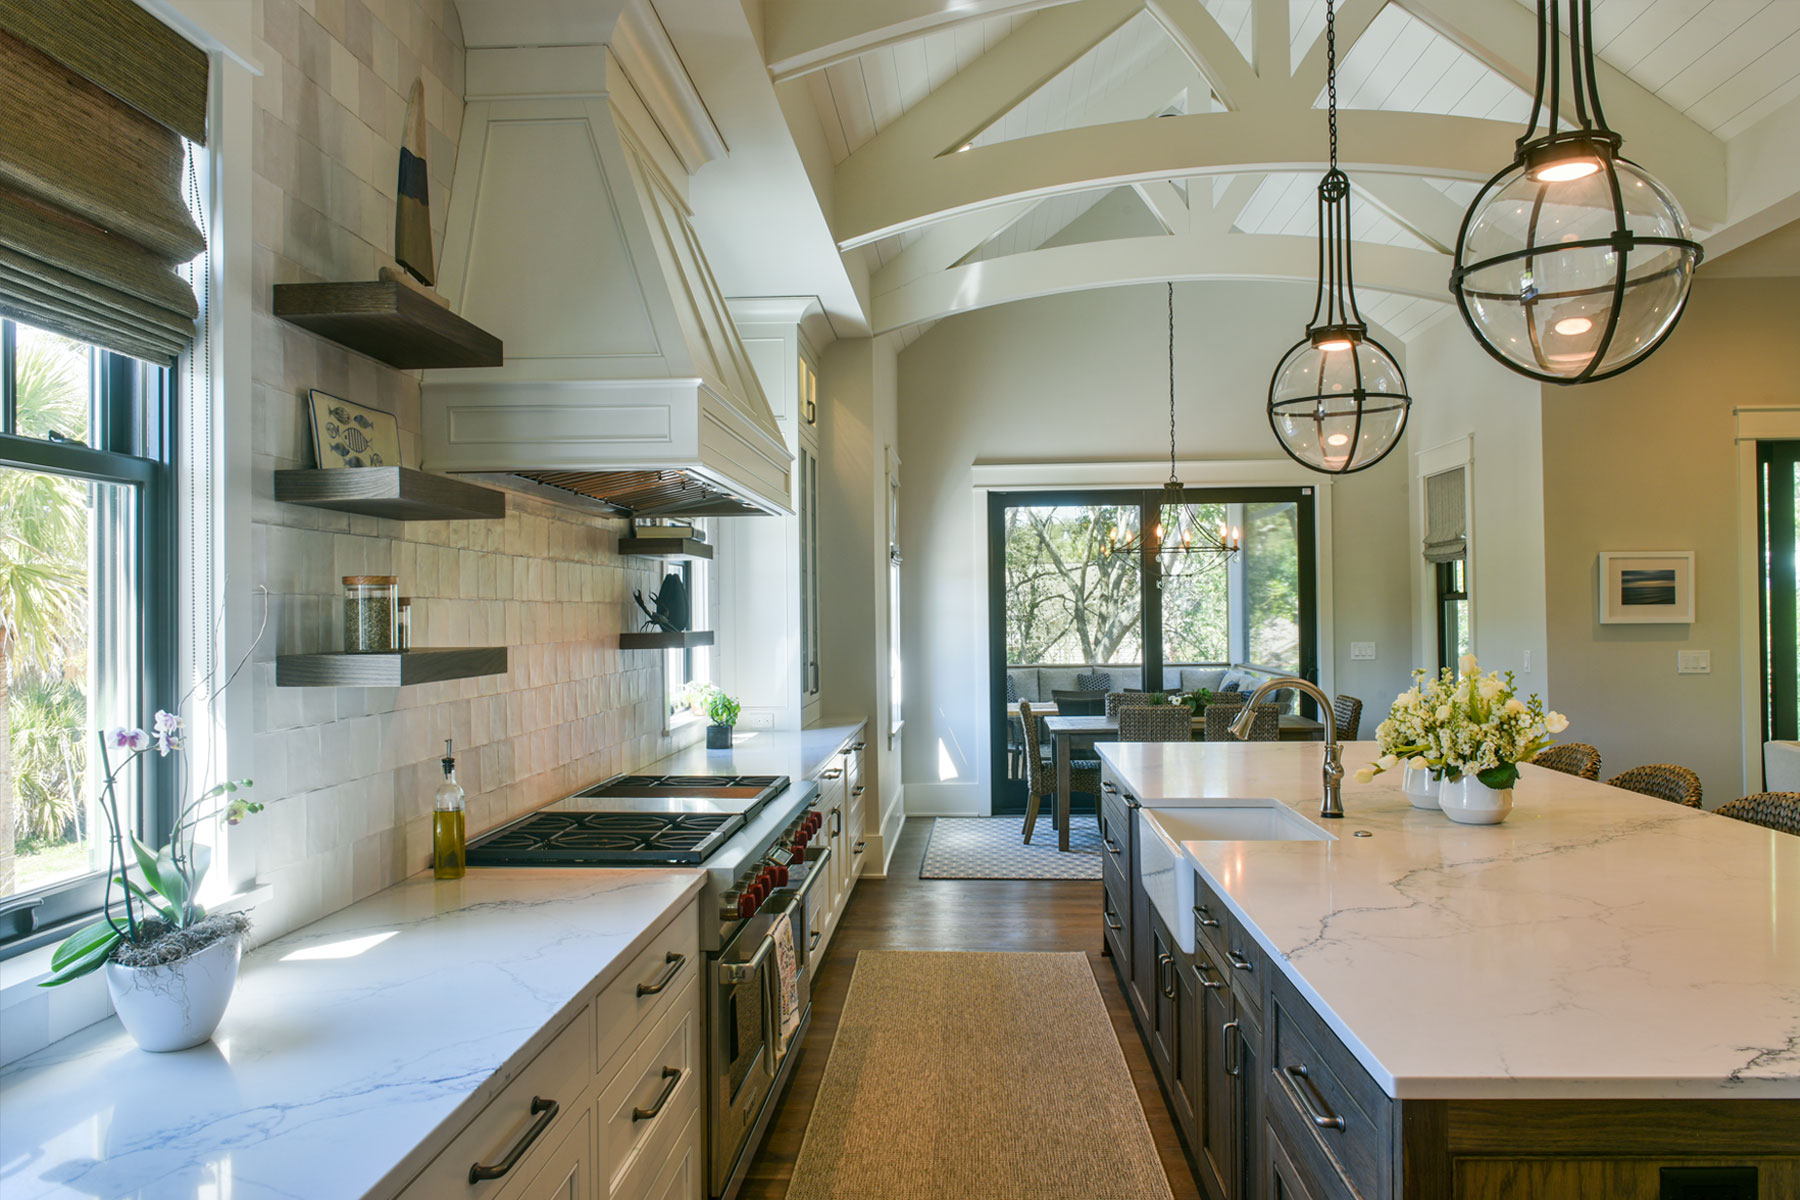 Entertaining kitchen with trussed ceiling open to living room with adjacent screened porch